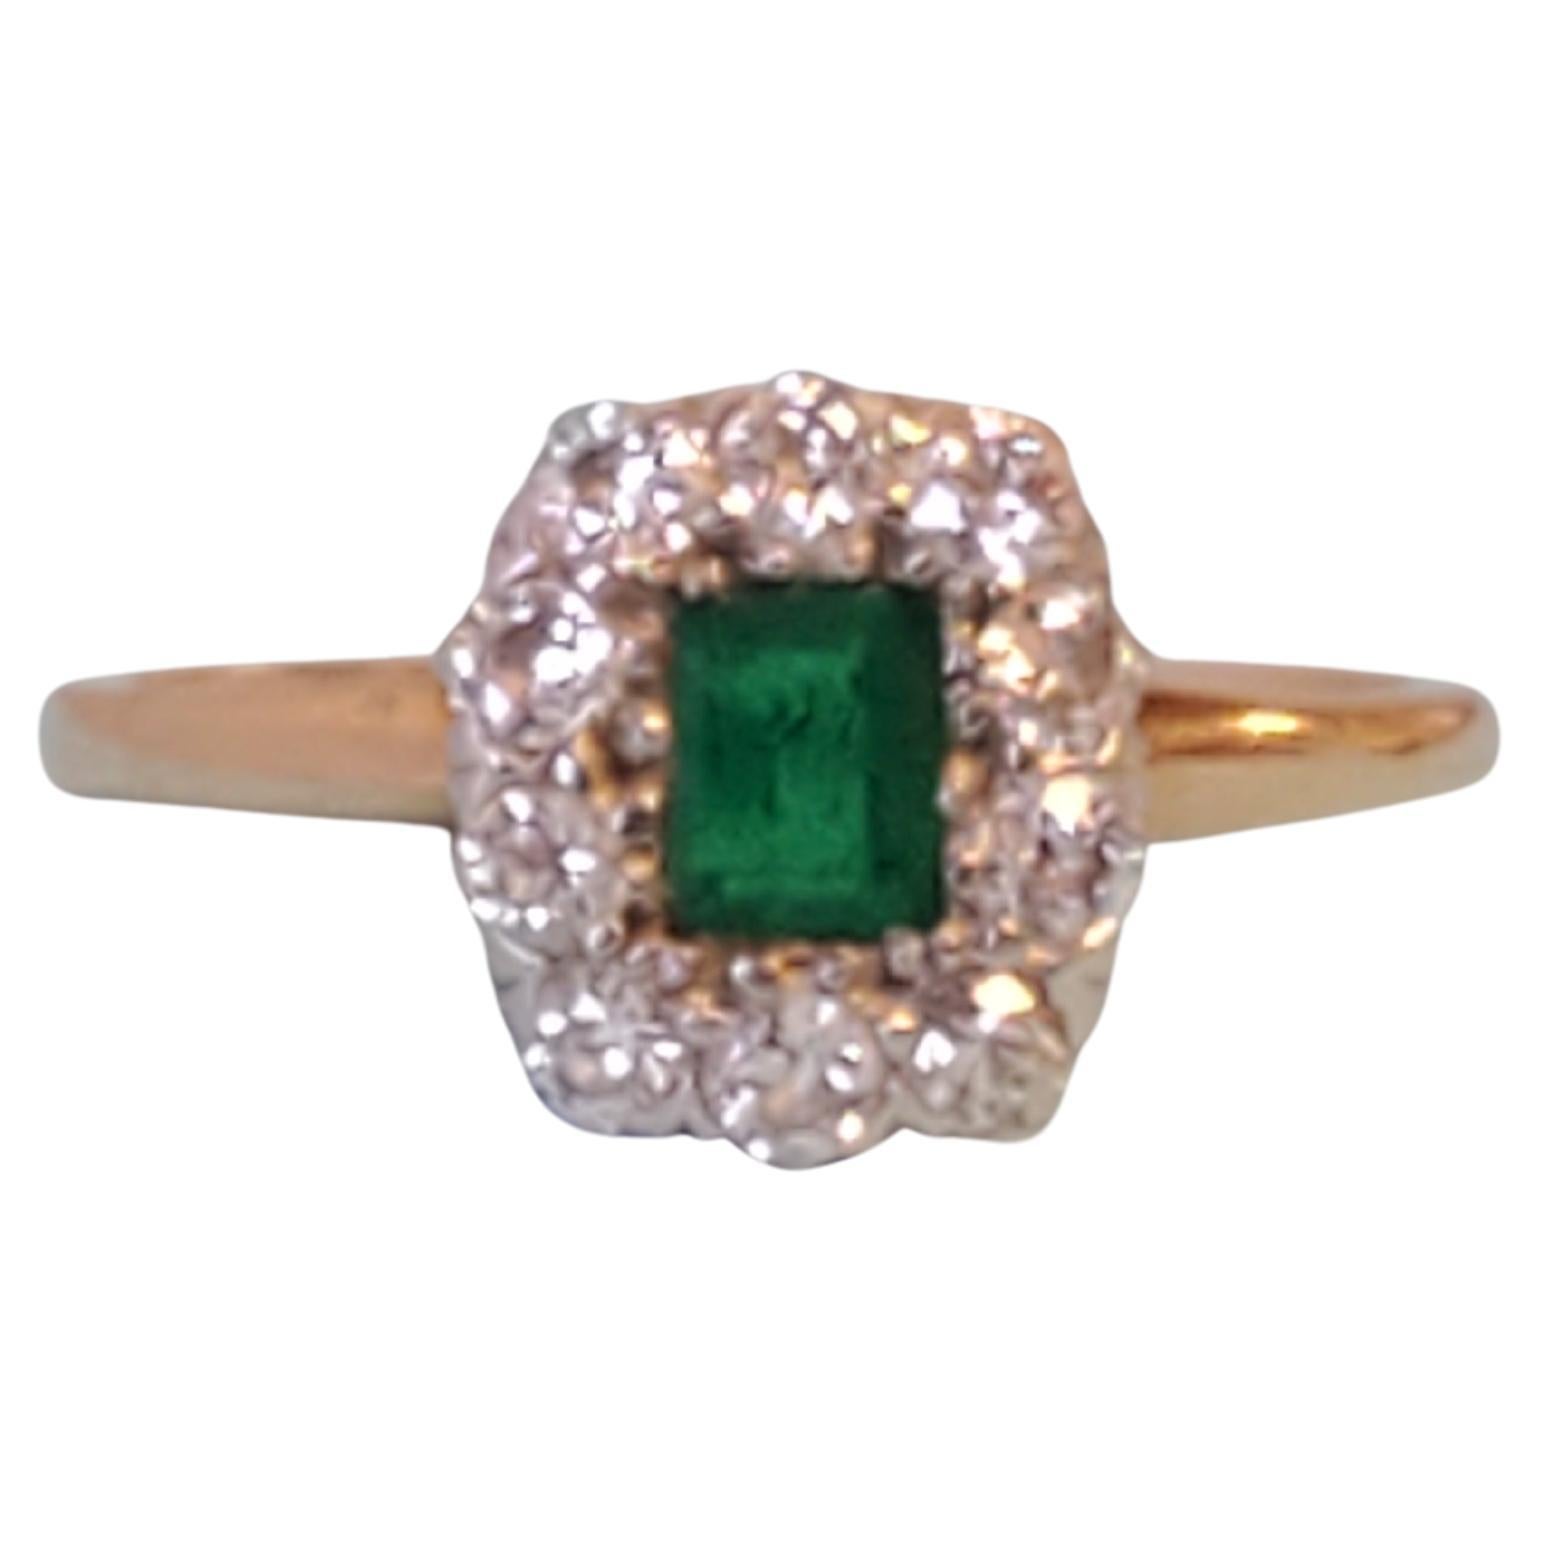 Antique 14k yellow gold emerald and old euro diamond ring.  Ultra green emerald center approximately .33ct surrounded by white vs old euro diamonds .40tcw. Ring size approx 4.5.